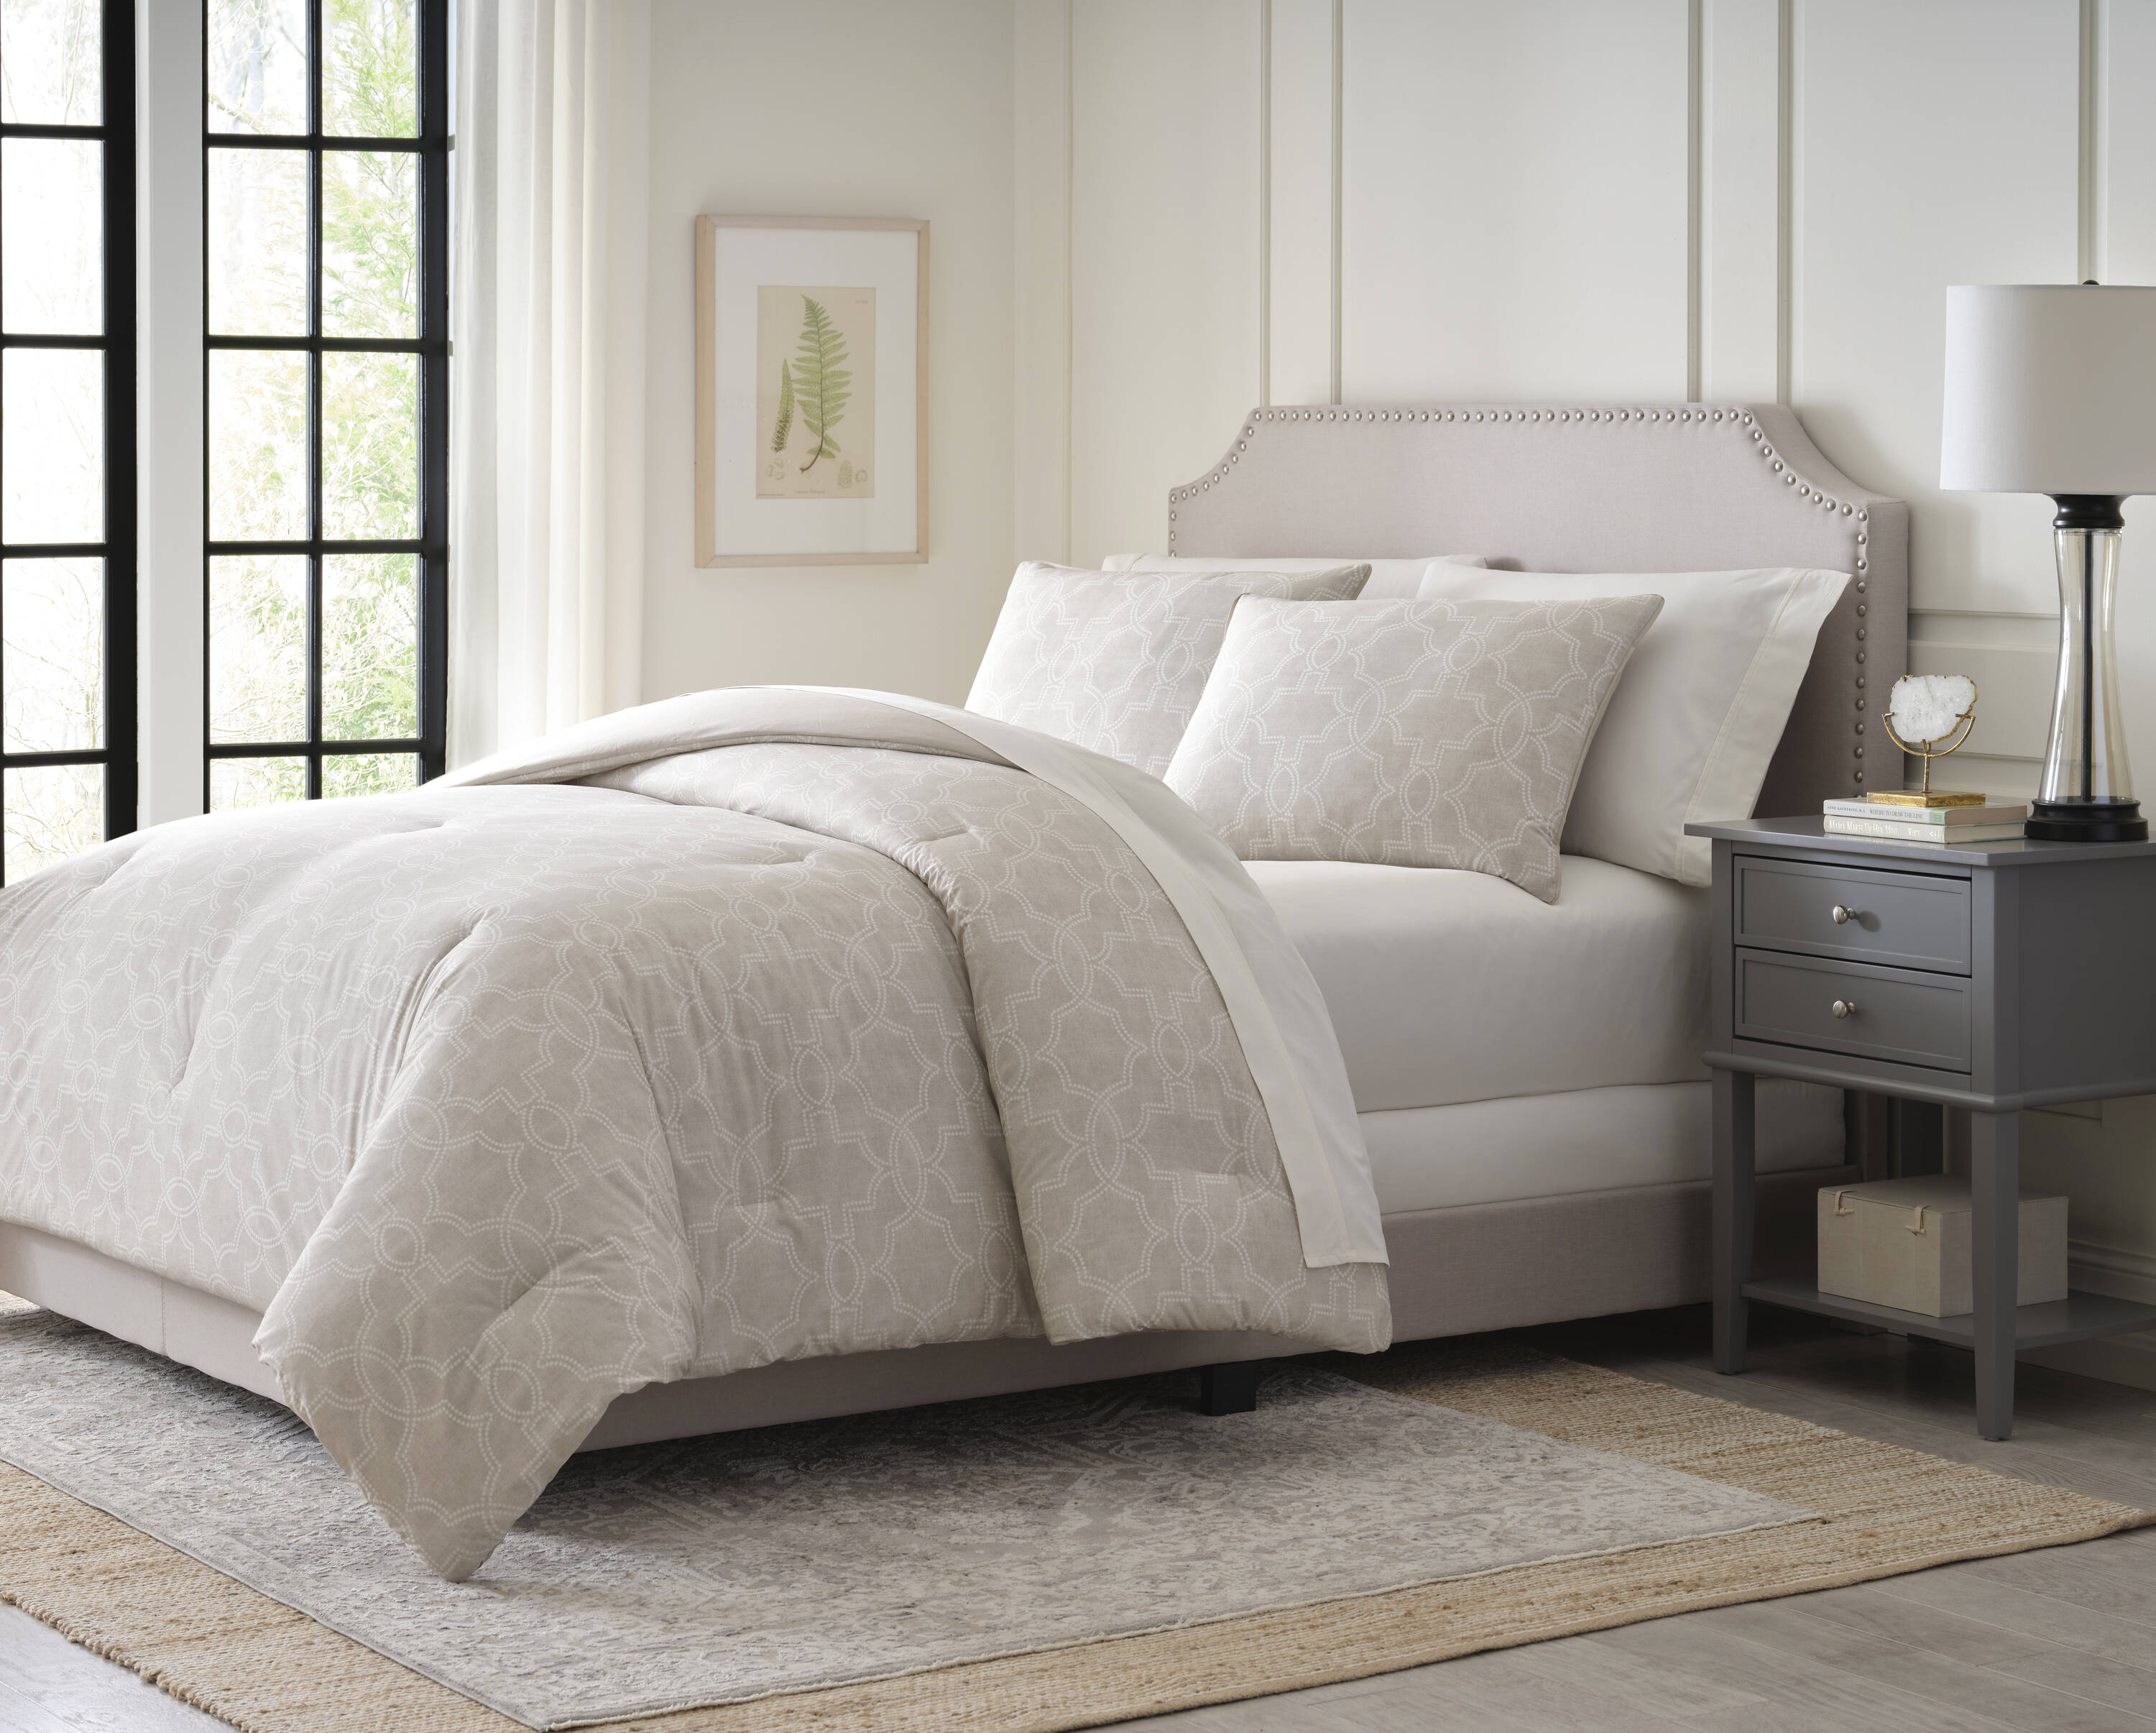 allen + roth allen + roth Montclair Reversible Comforter Set Serenity  Damask Full/Queen Comforter (Cotton with Polyester Fill) in the Comforters  & Bedspreads department at